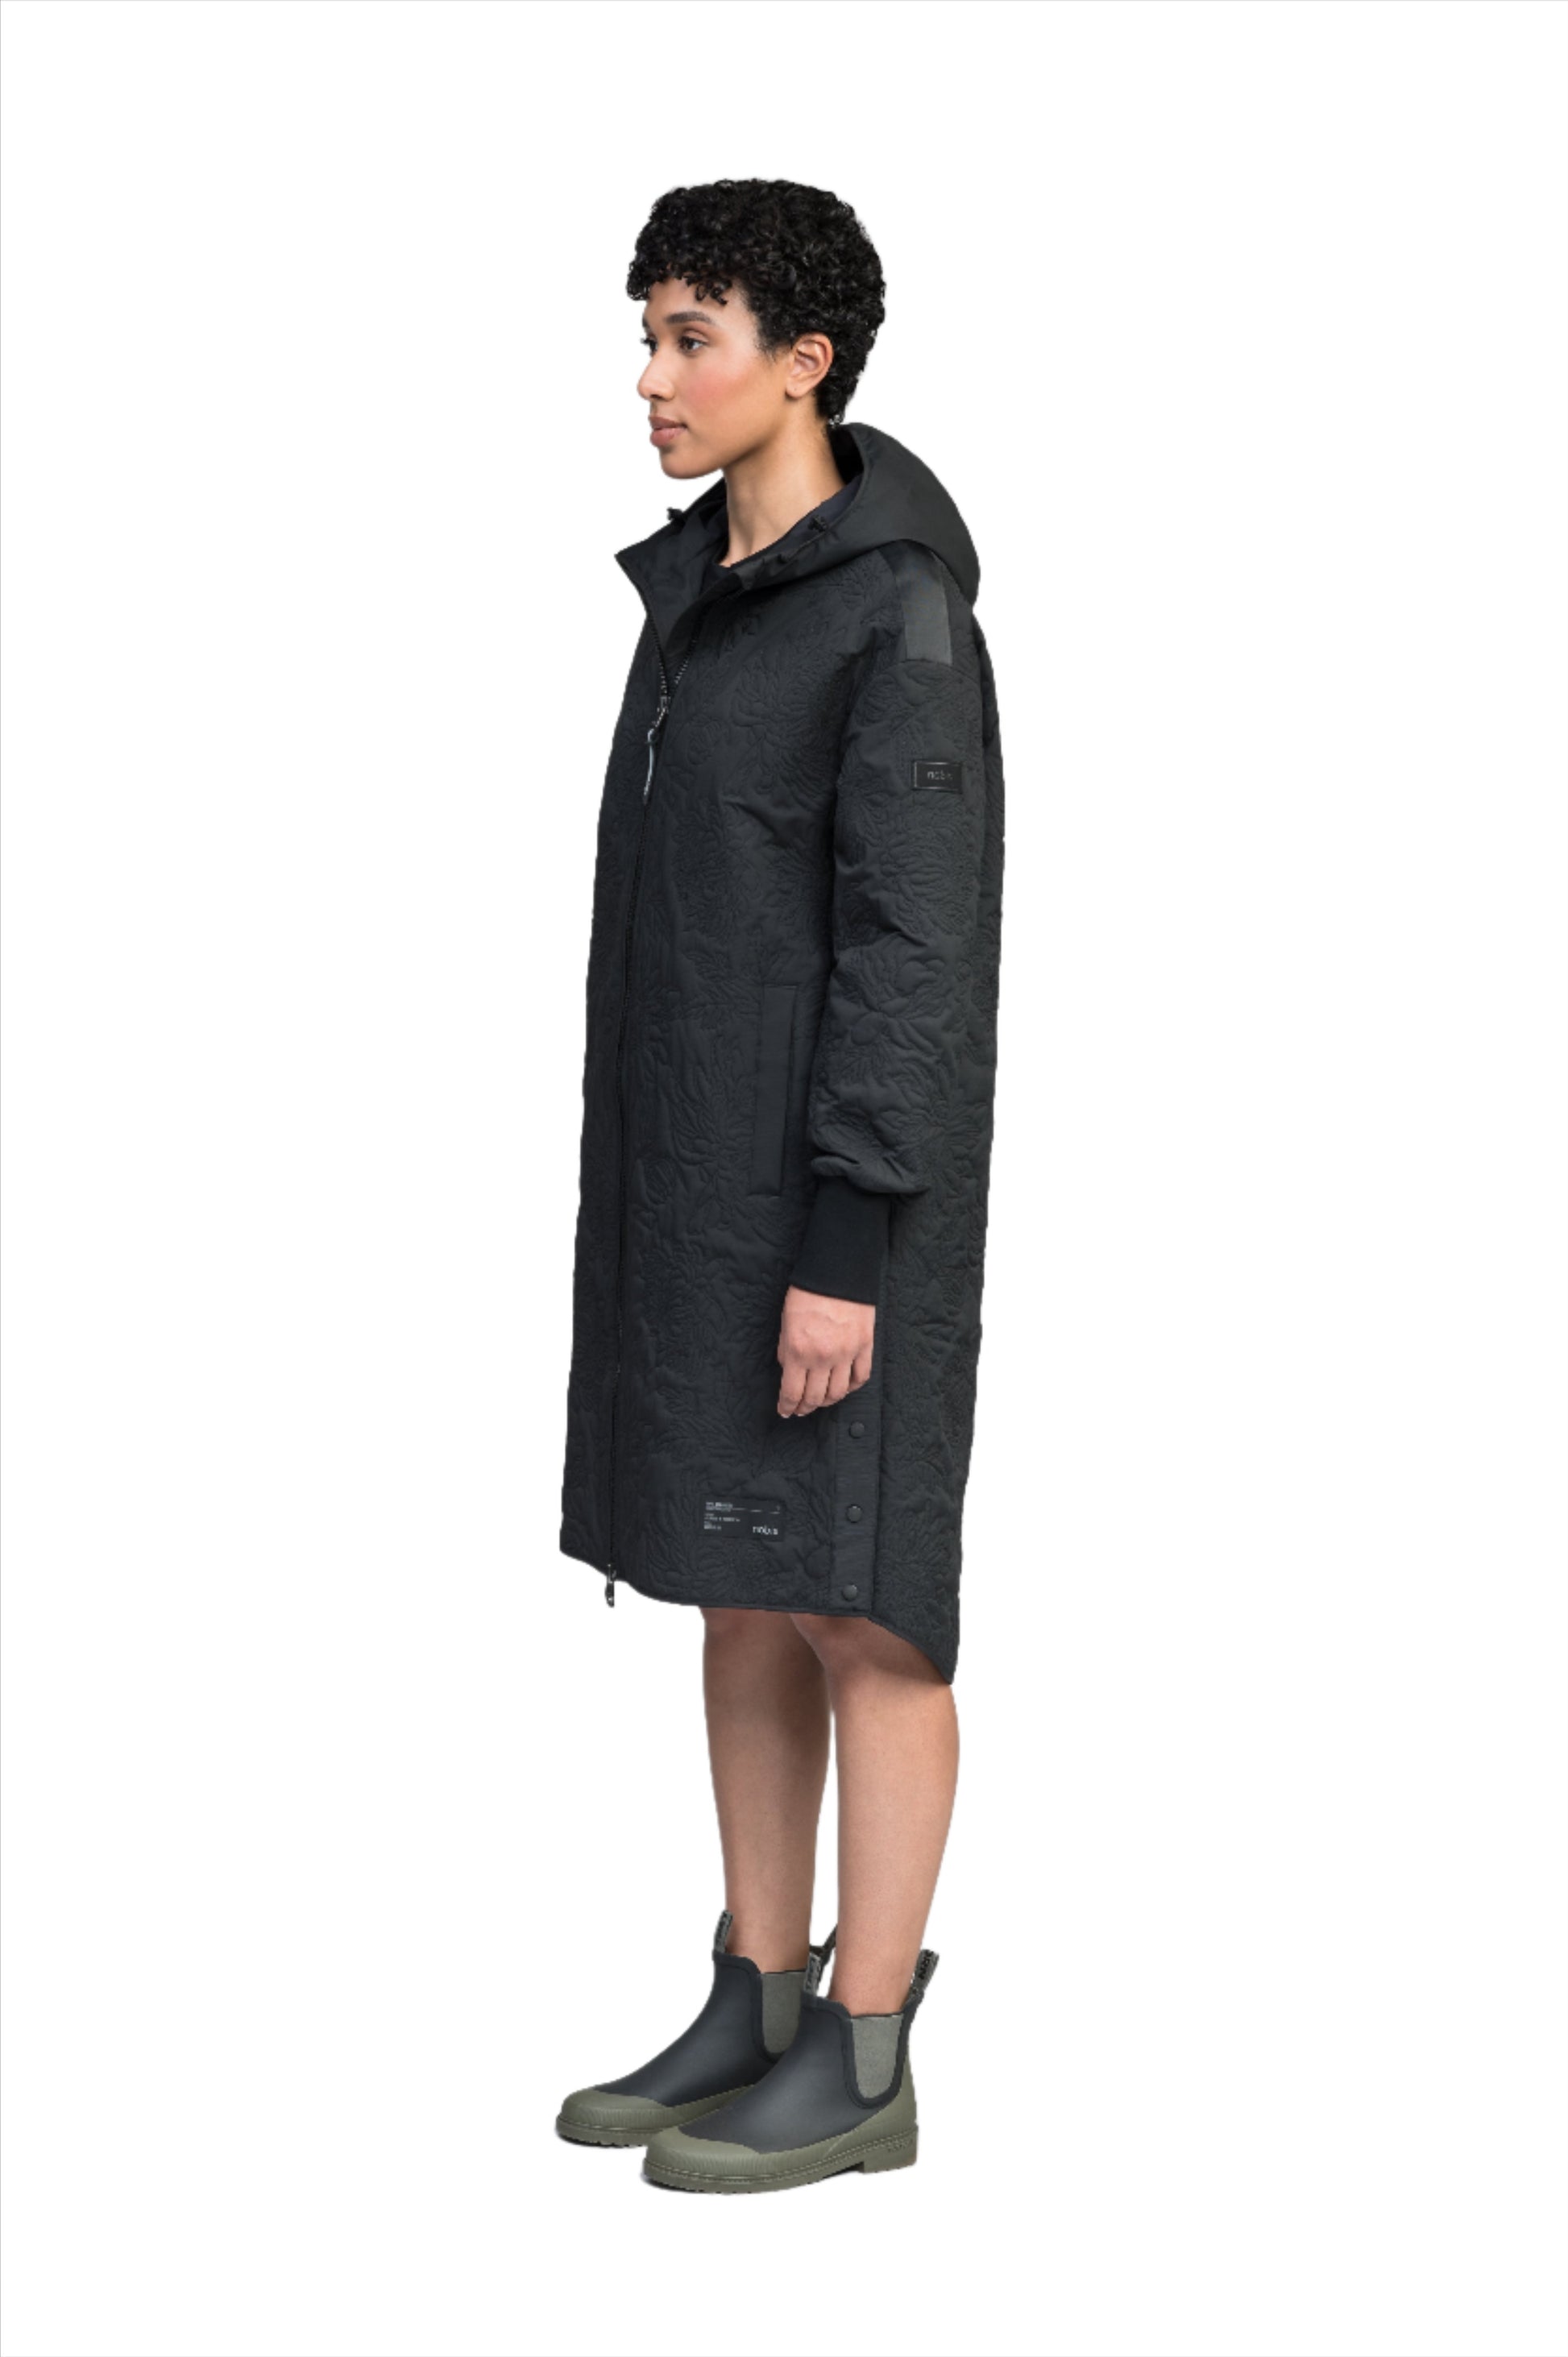 Surrey Women's Performance Quilted Long Mid Layer Jacket in knee length, Primaloft Gold Insulation Active+, non-removable hood, single welt magnetic closure pockets, ribbed cuffs, two-way centre front zipper, grosgrain ribbon detail and shoulders and side seam, and snap closure side seam vents, in Black